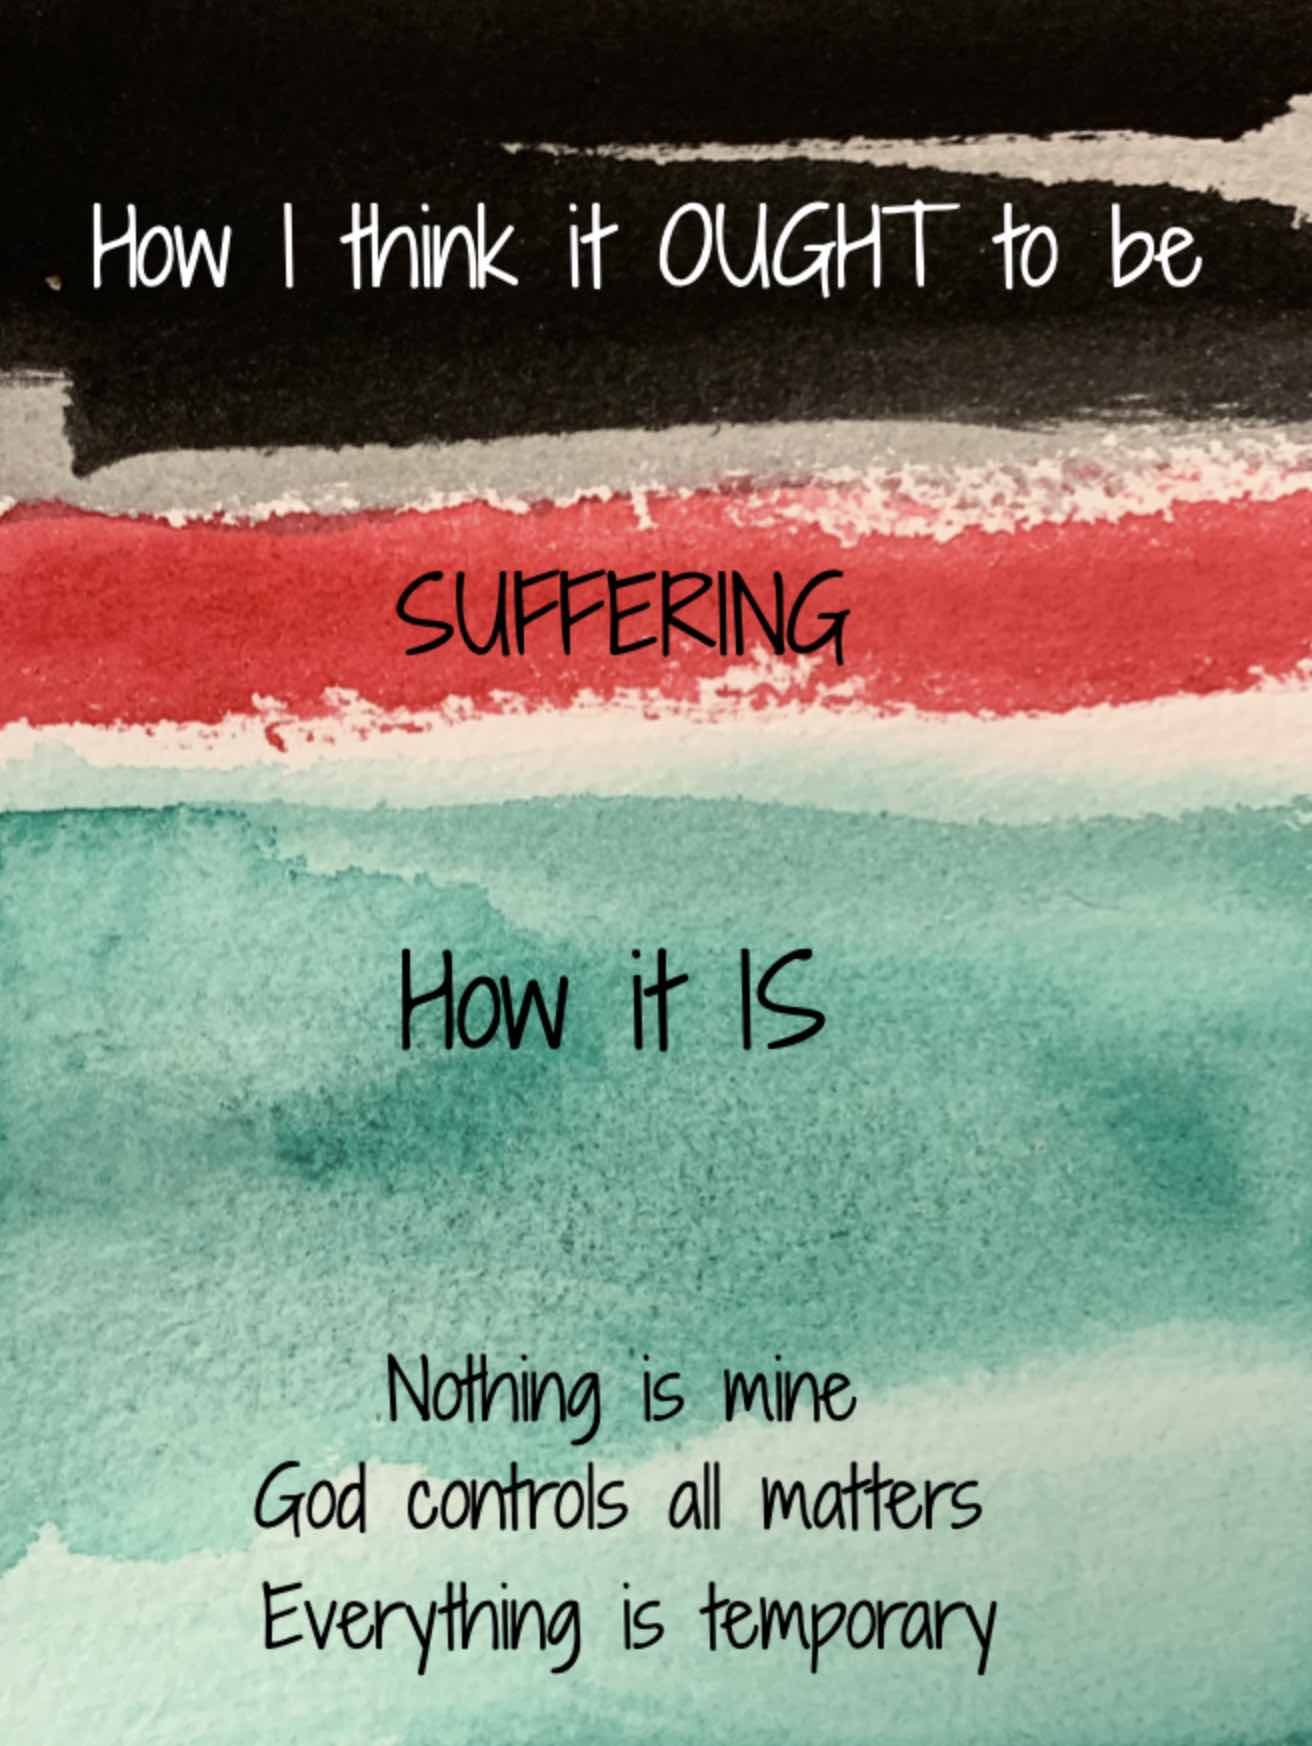 The cause of suffering